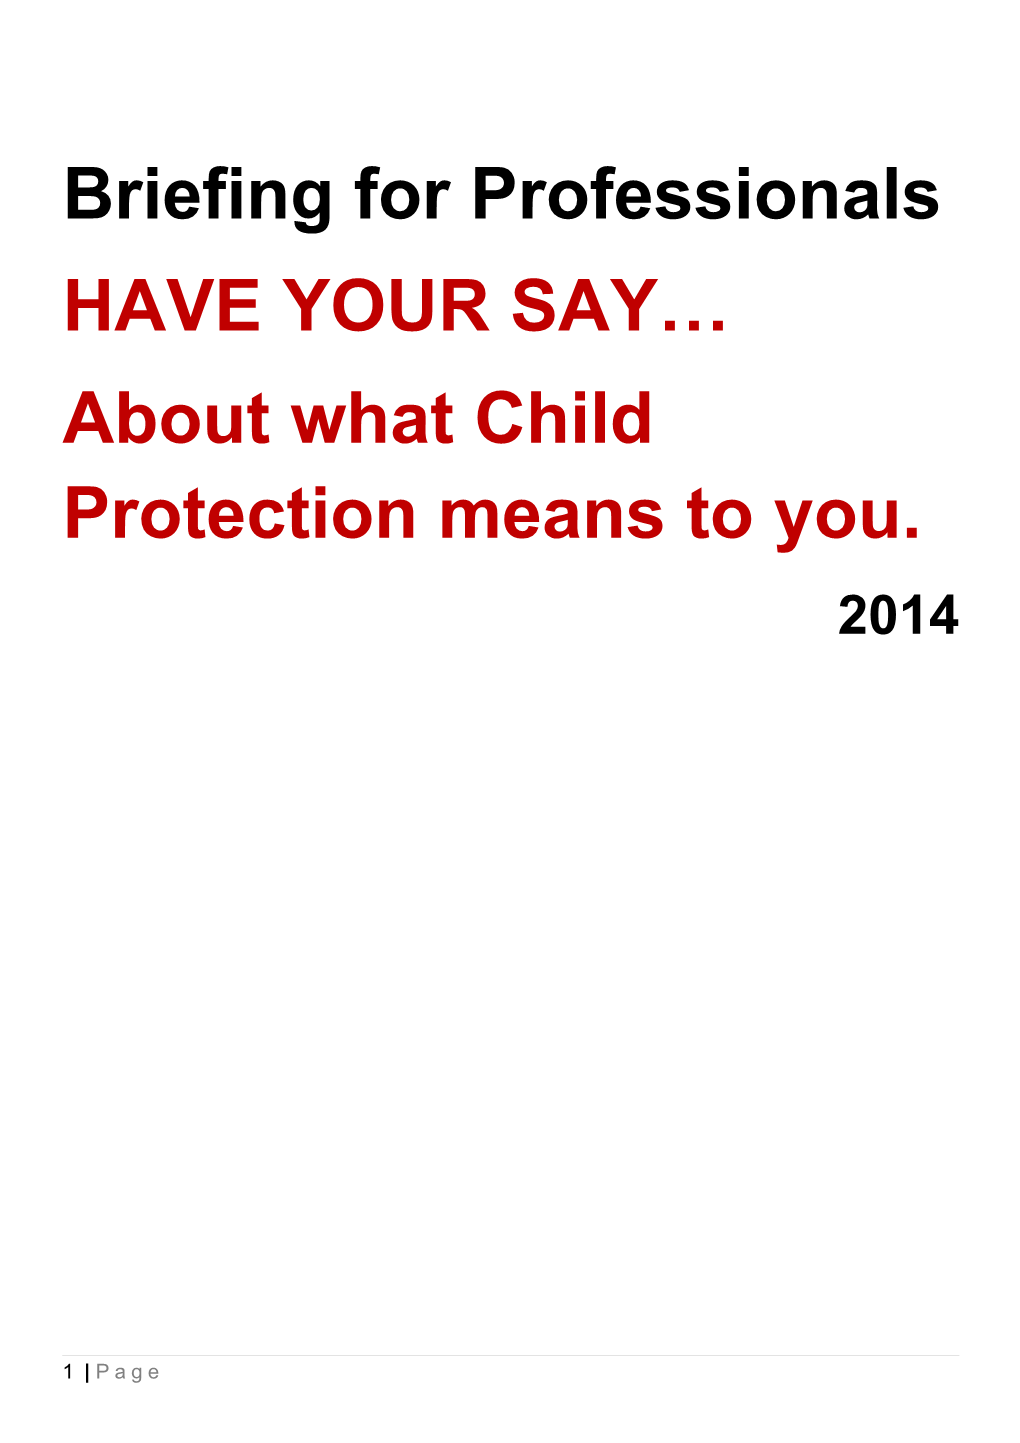 About What Child Protection Means to You